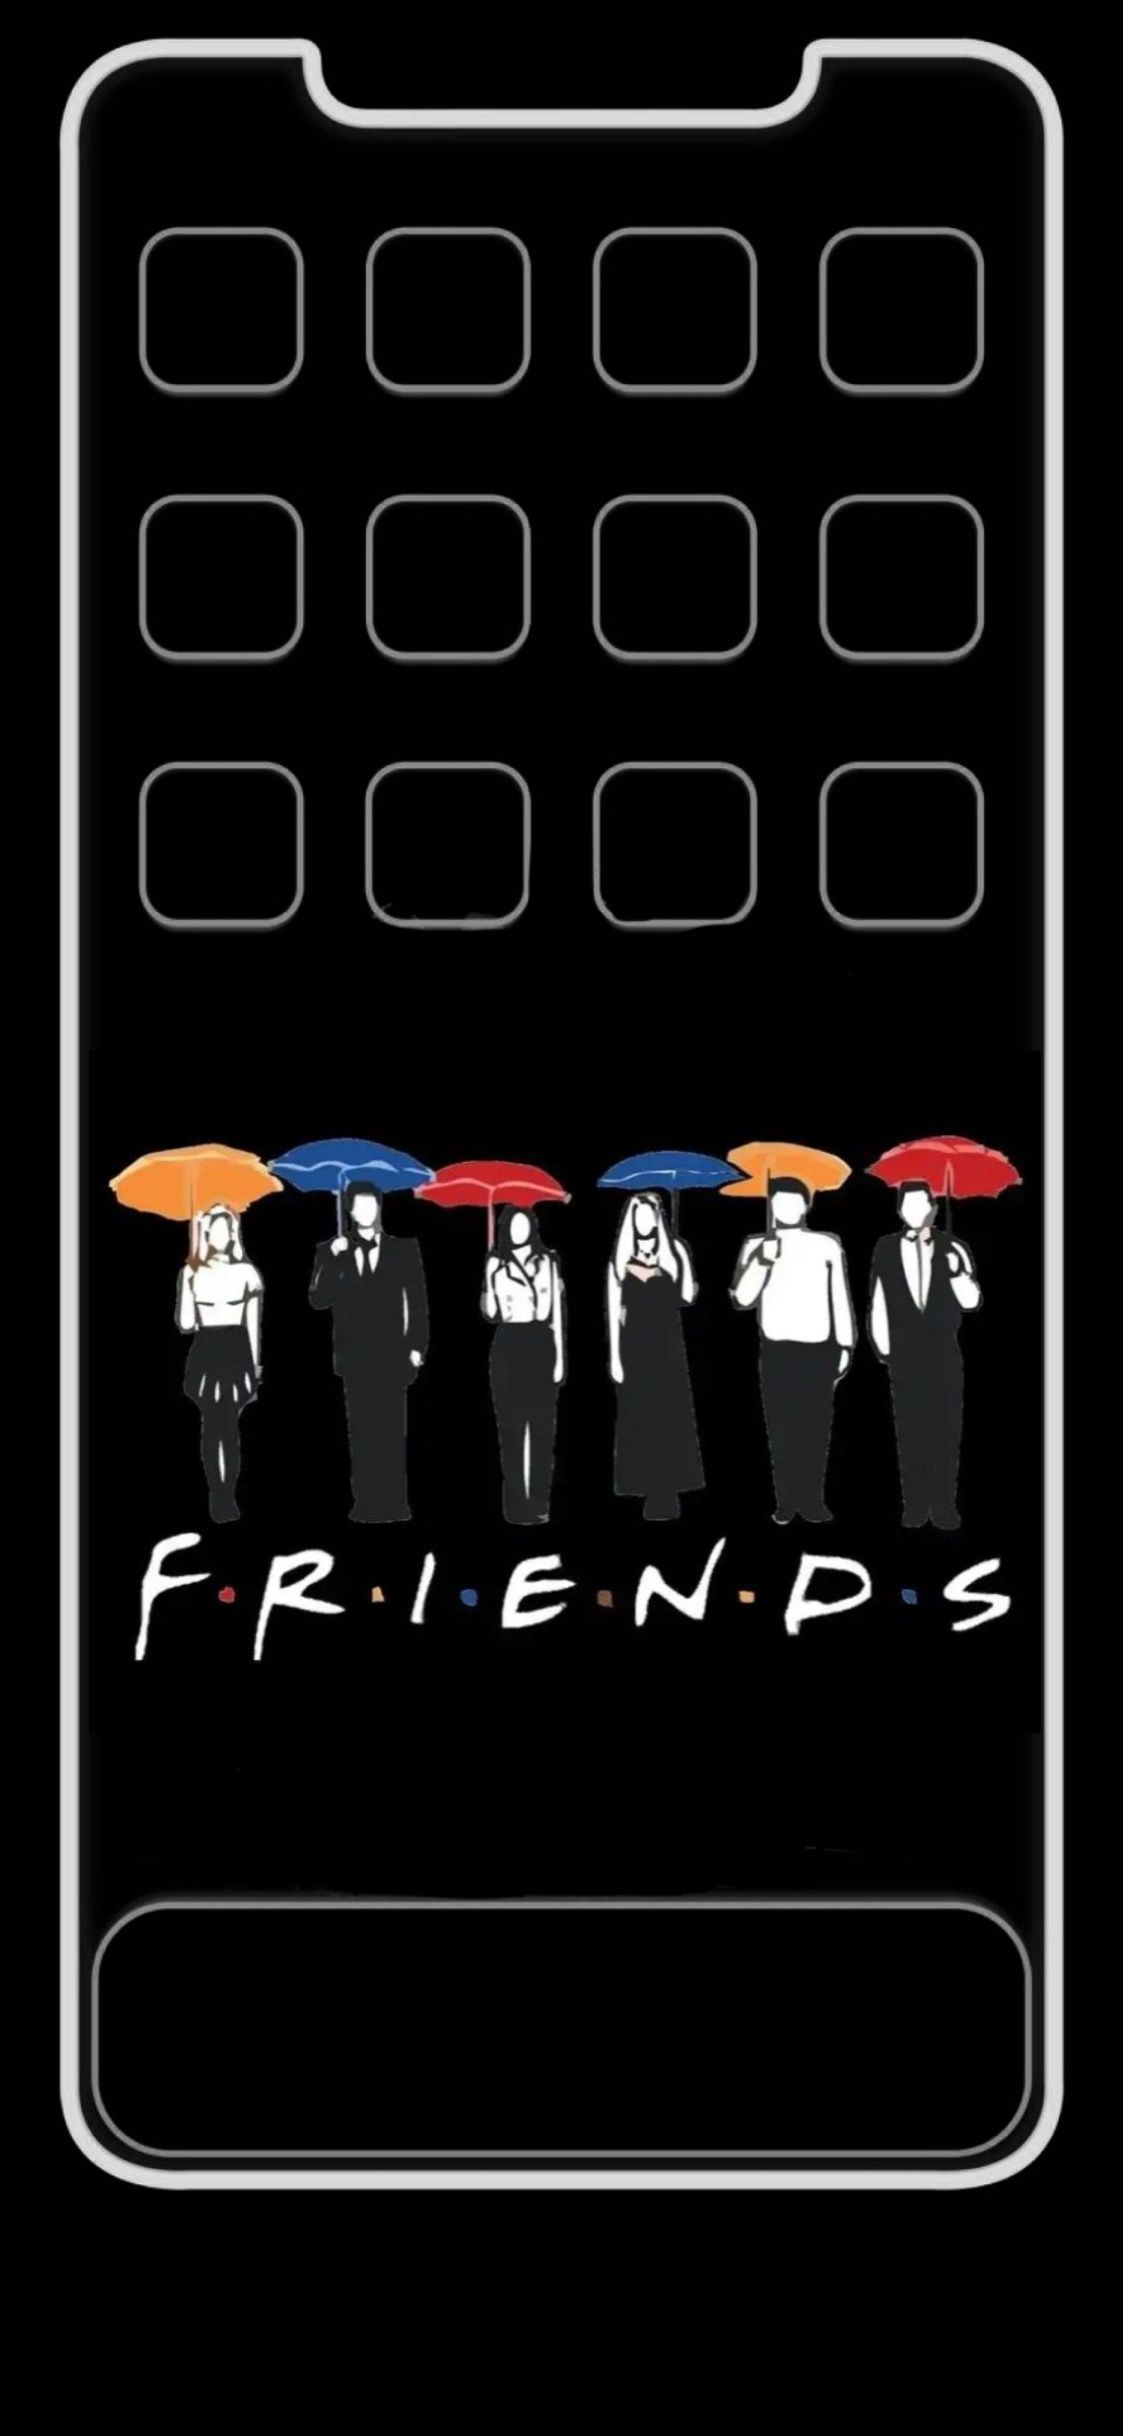 Friends TV Show iPhone Wallpaper Free Friends TV Show iPhone Background